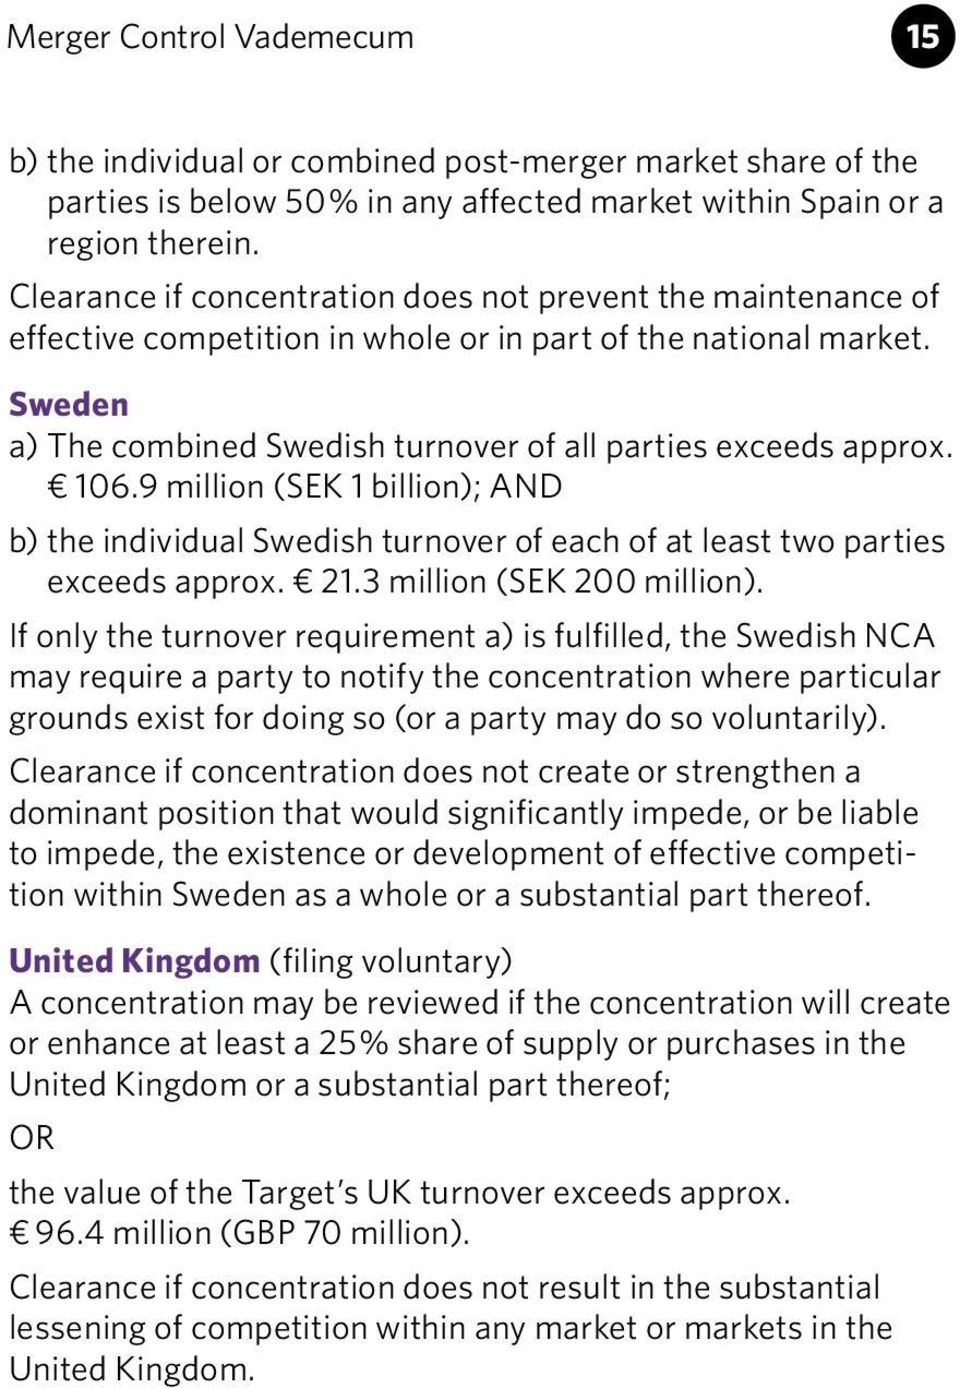 106.9 million (SEK 1 billion); AND b) the individual Swedish turnover of each of at least two parties exceeds approx. 21.3 million (SEK 200 million).